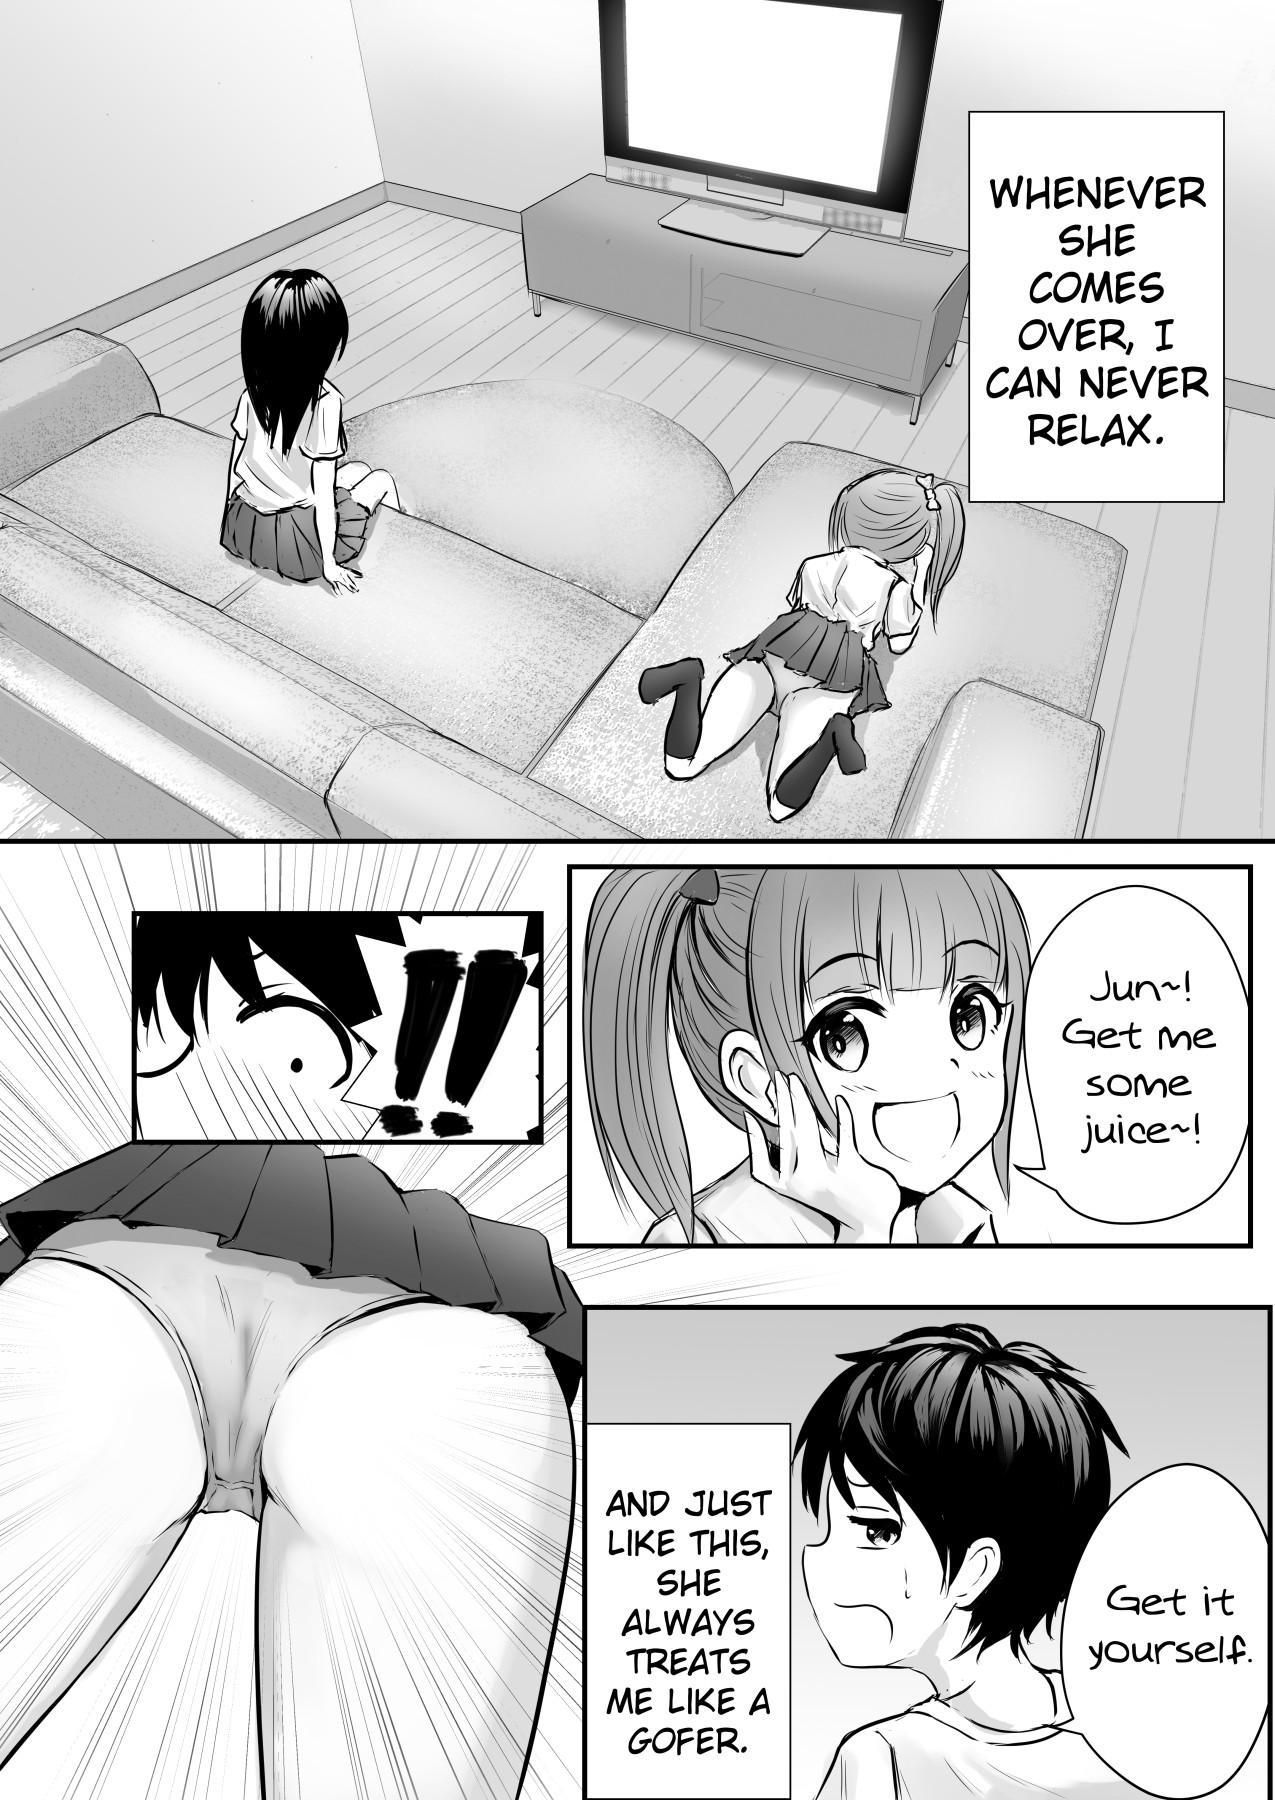 Curious Ane no Shinyuu to Ikaseai | Getting Lewd With My Sister's Best Friend - Original Gay Broken - Page 4